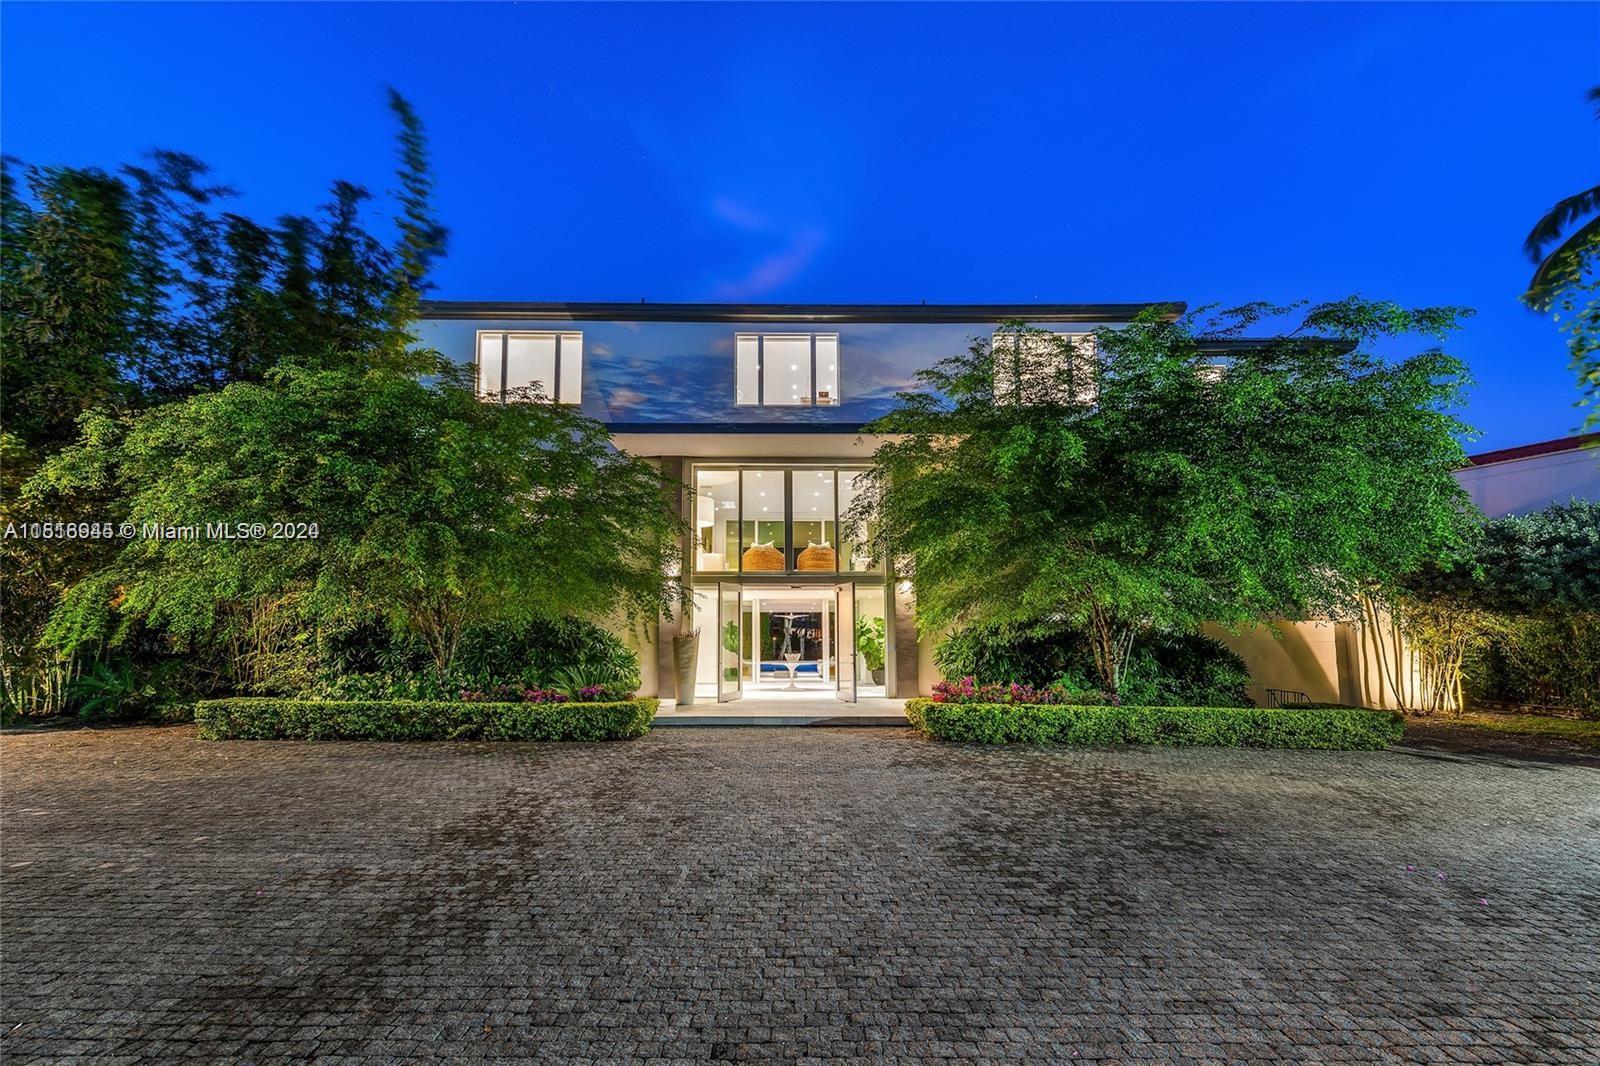 Property for Sale at 481 S Mashta Drive Dr, Key Biscayne, Miami-Dade County, Florida - Bedrooms: 5 
Bathrooms: 7  - $21,900,000